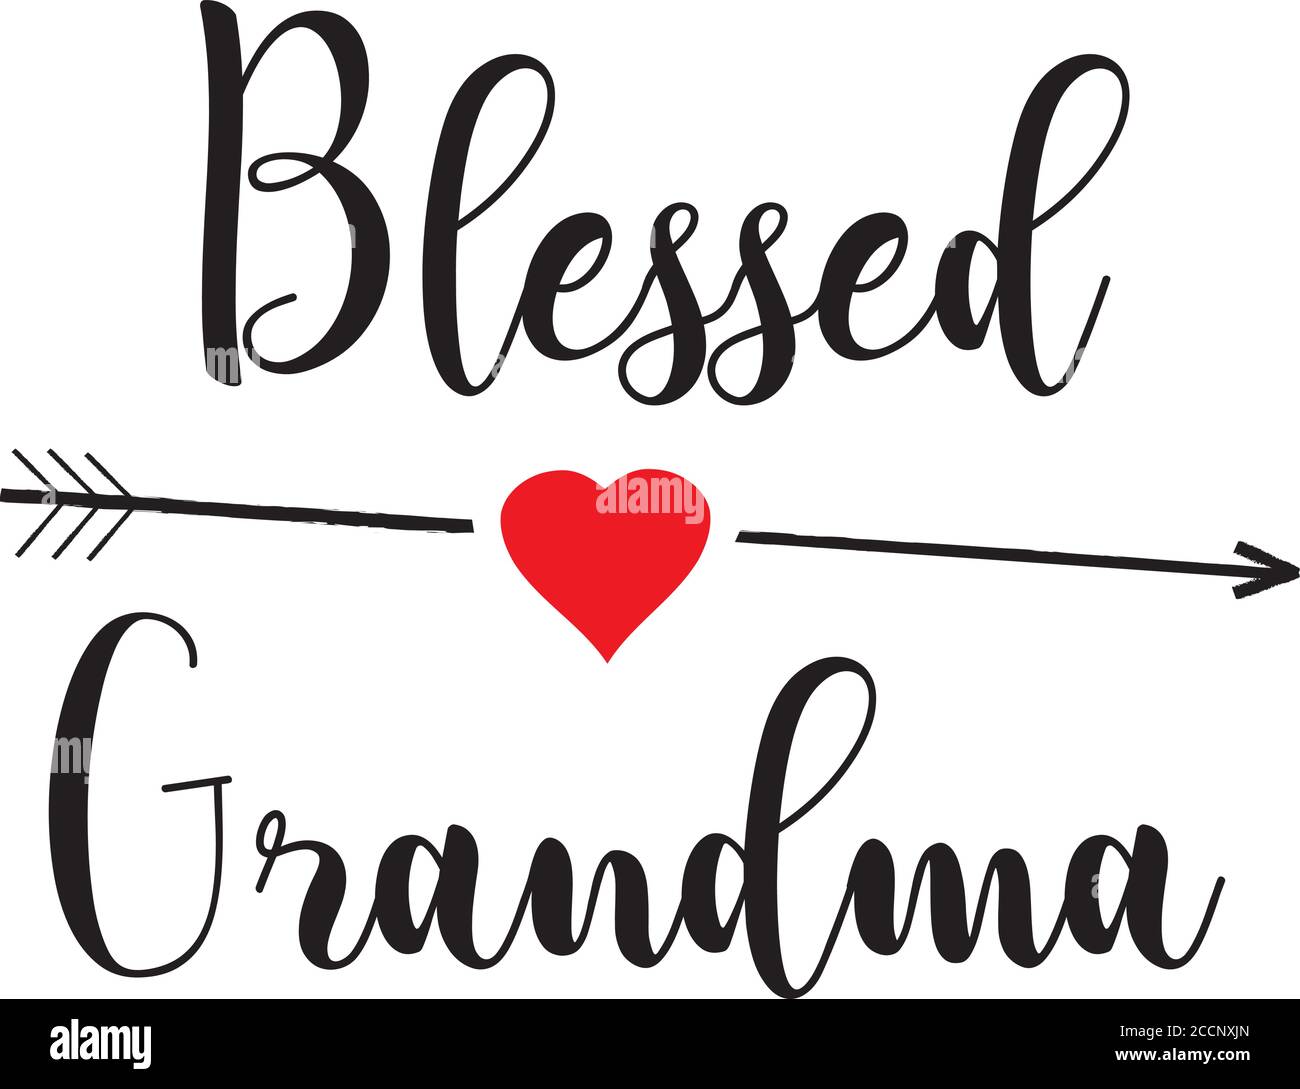 vector illustration of a blessed grandma text, an arrow, red heart. Stock Vector